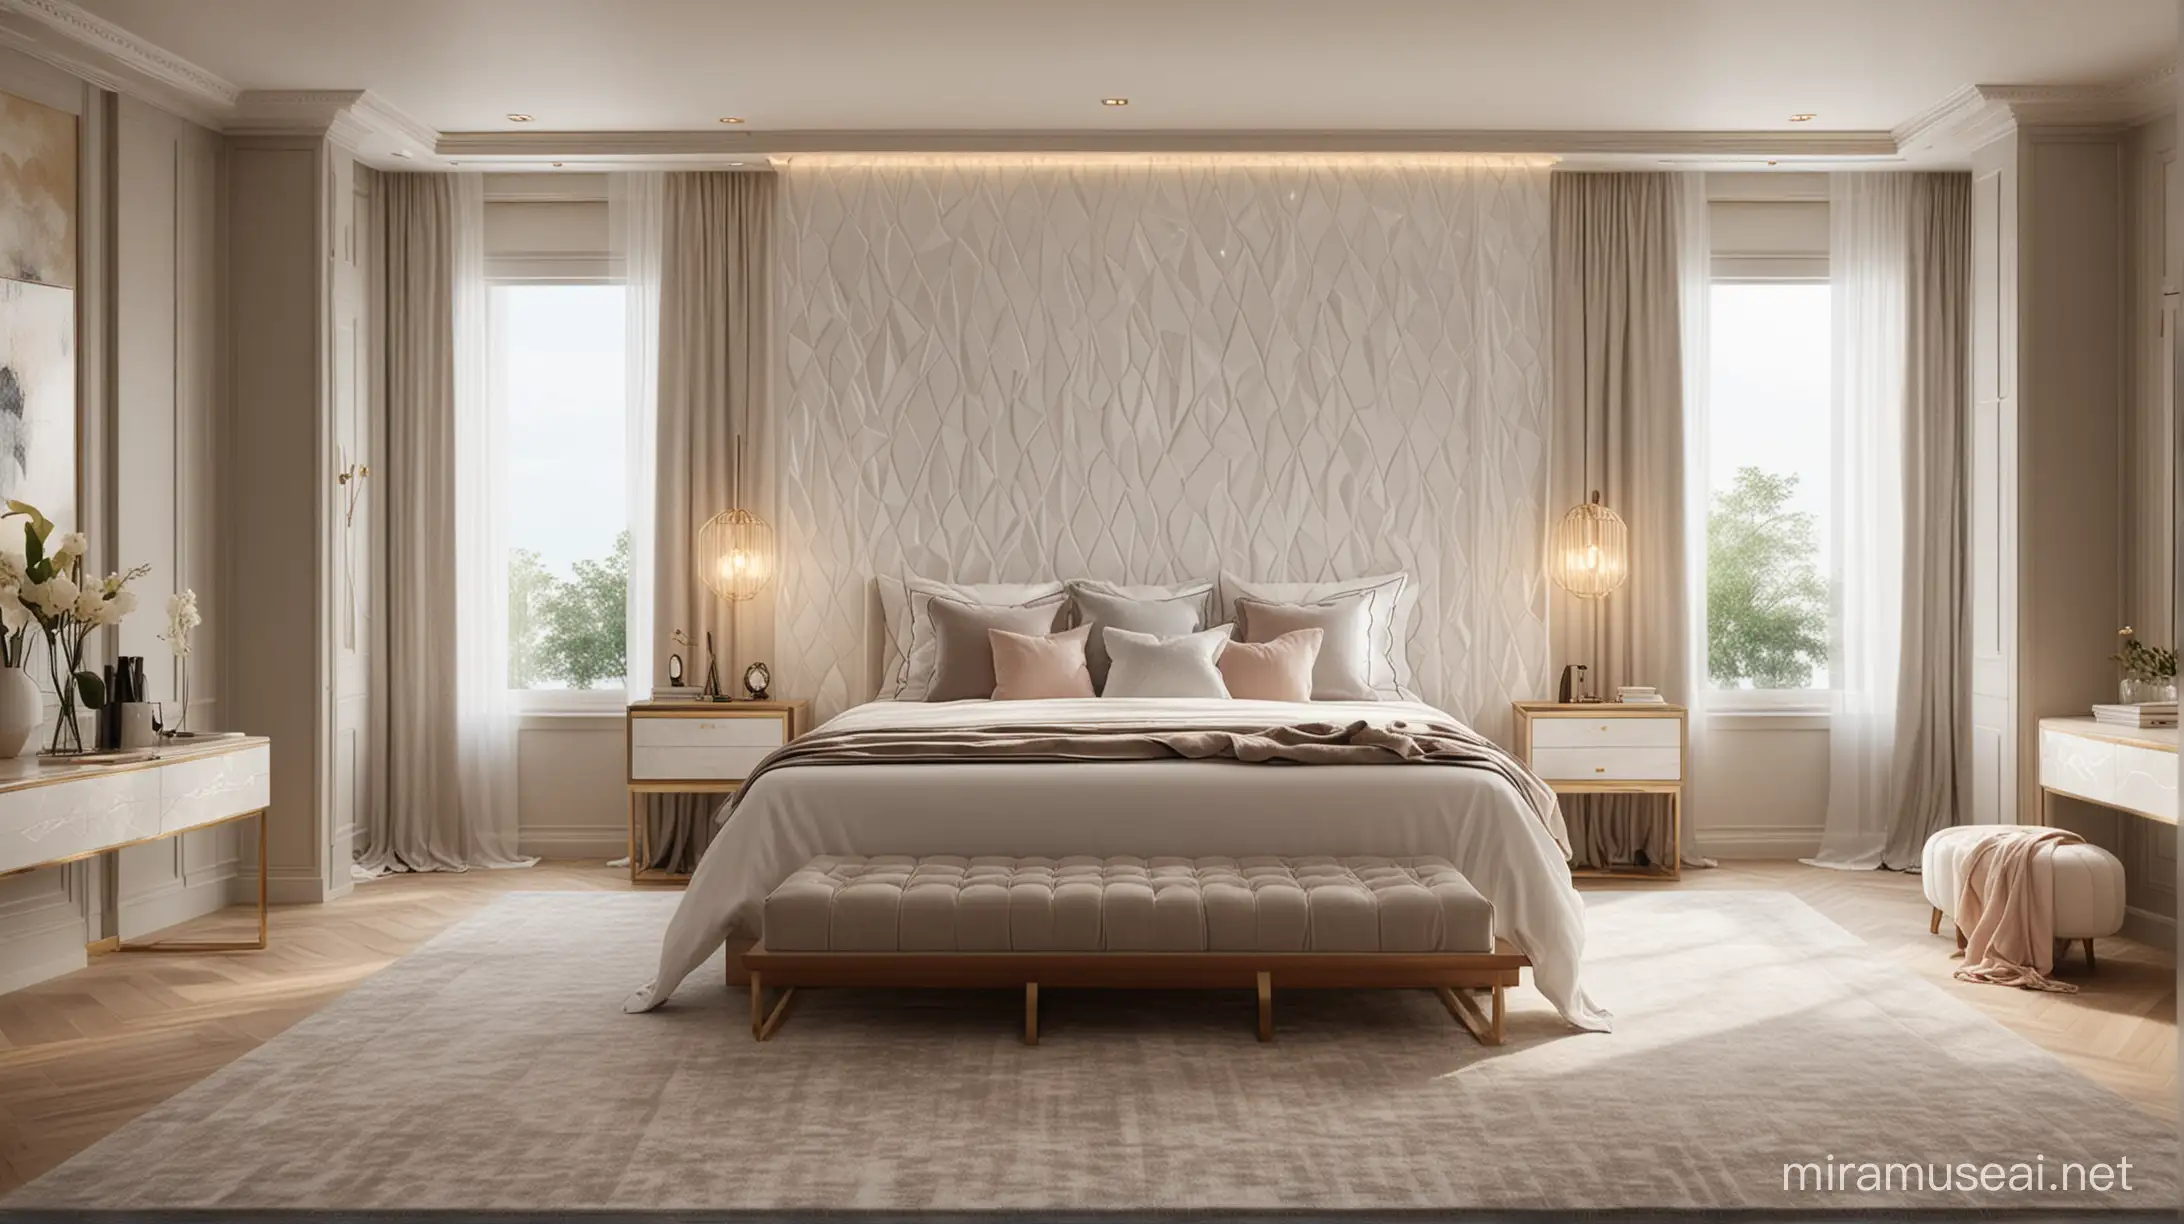 Elegant FrenchStyle Modern Bedroom with Opulent Paneling and Asymmetrical Lighting